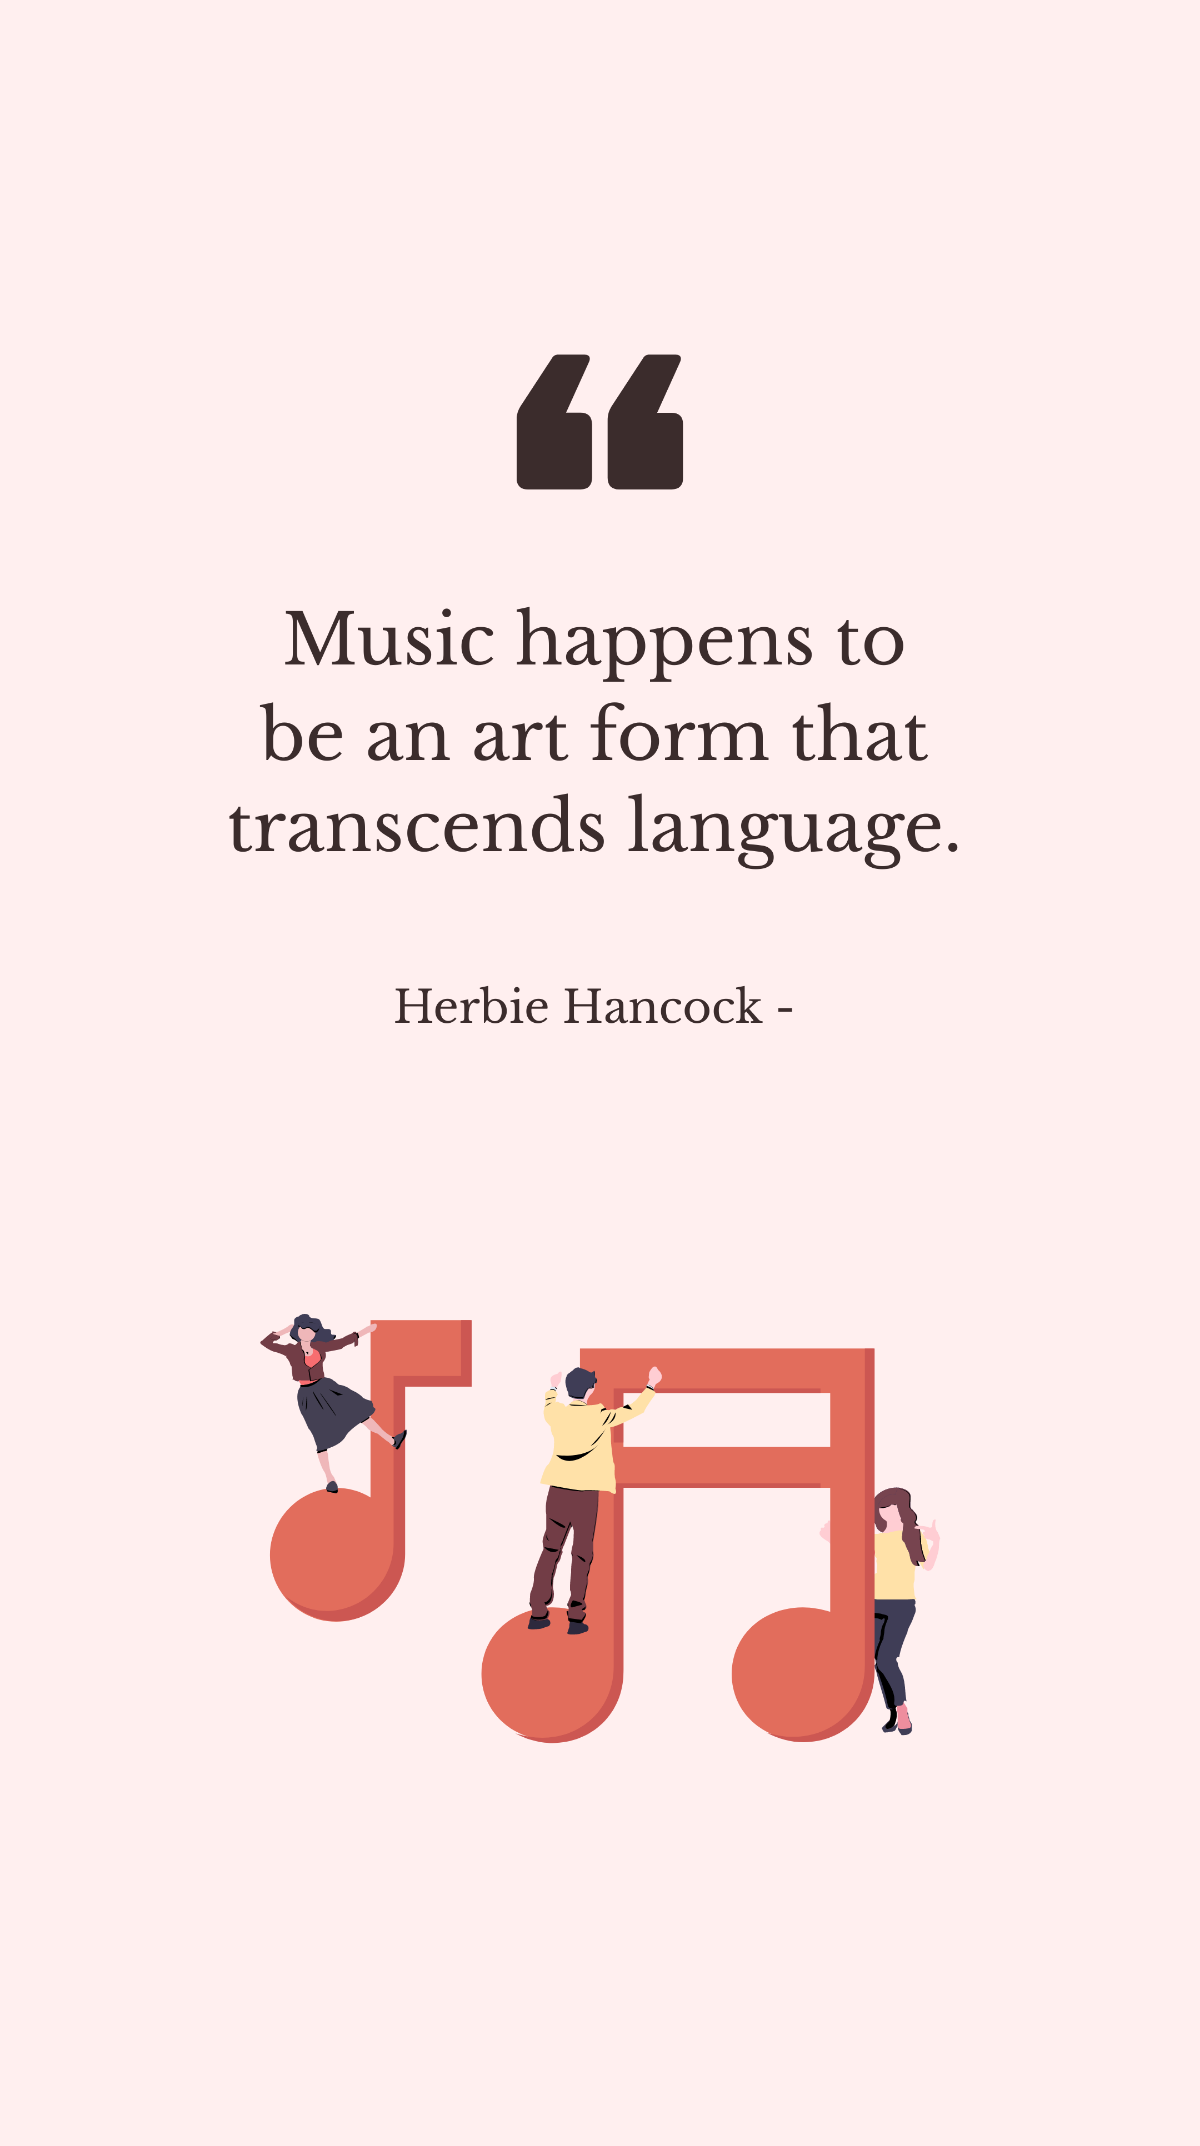 Herbie Hancock - Music happens to be an art form that transcends language.